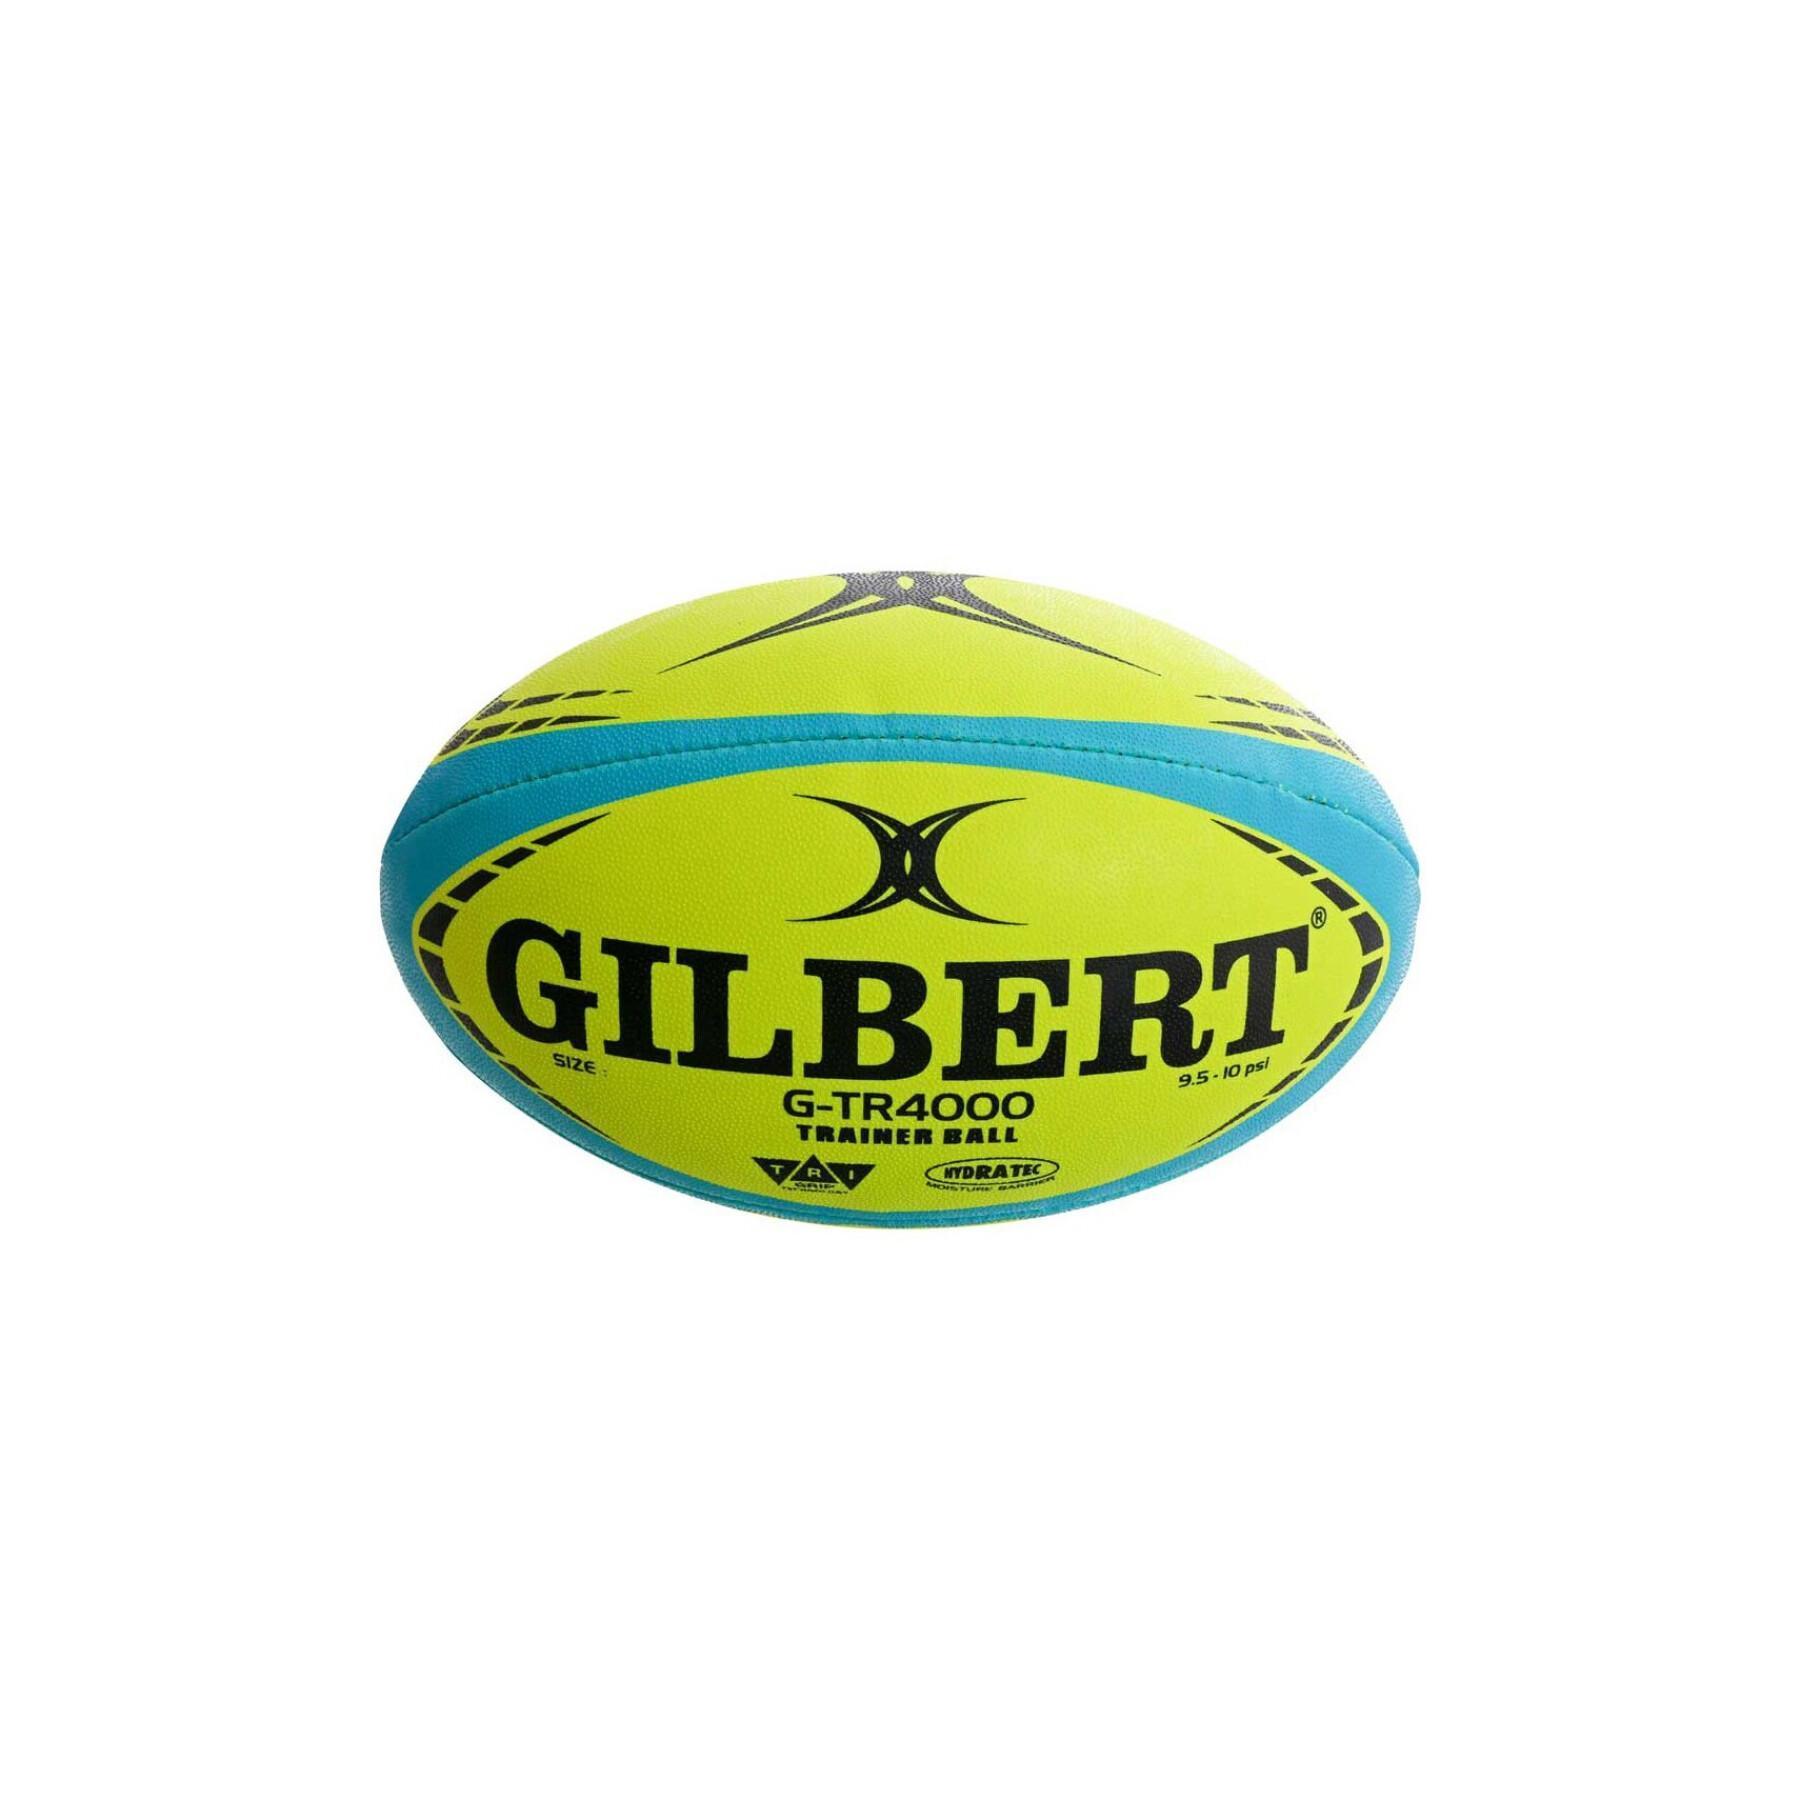 Ballon de rugby Gilbert G-TR4000 Trainer Fluo (taille 4)